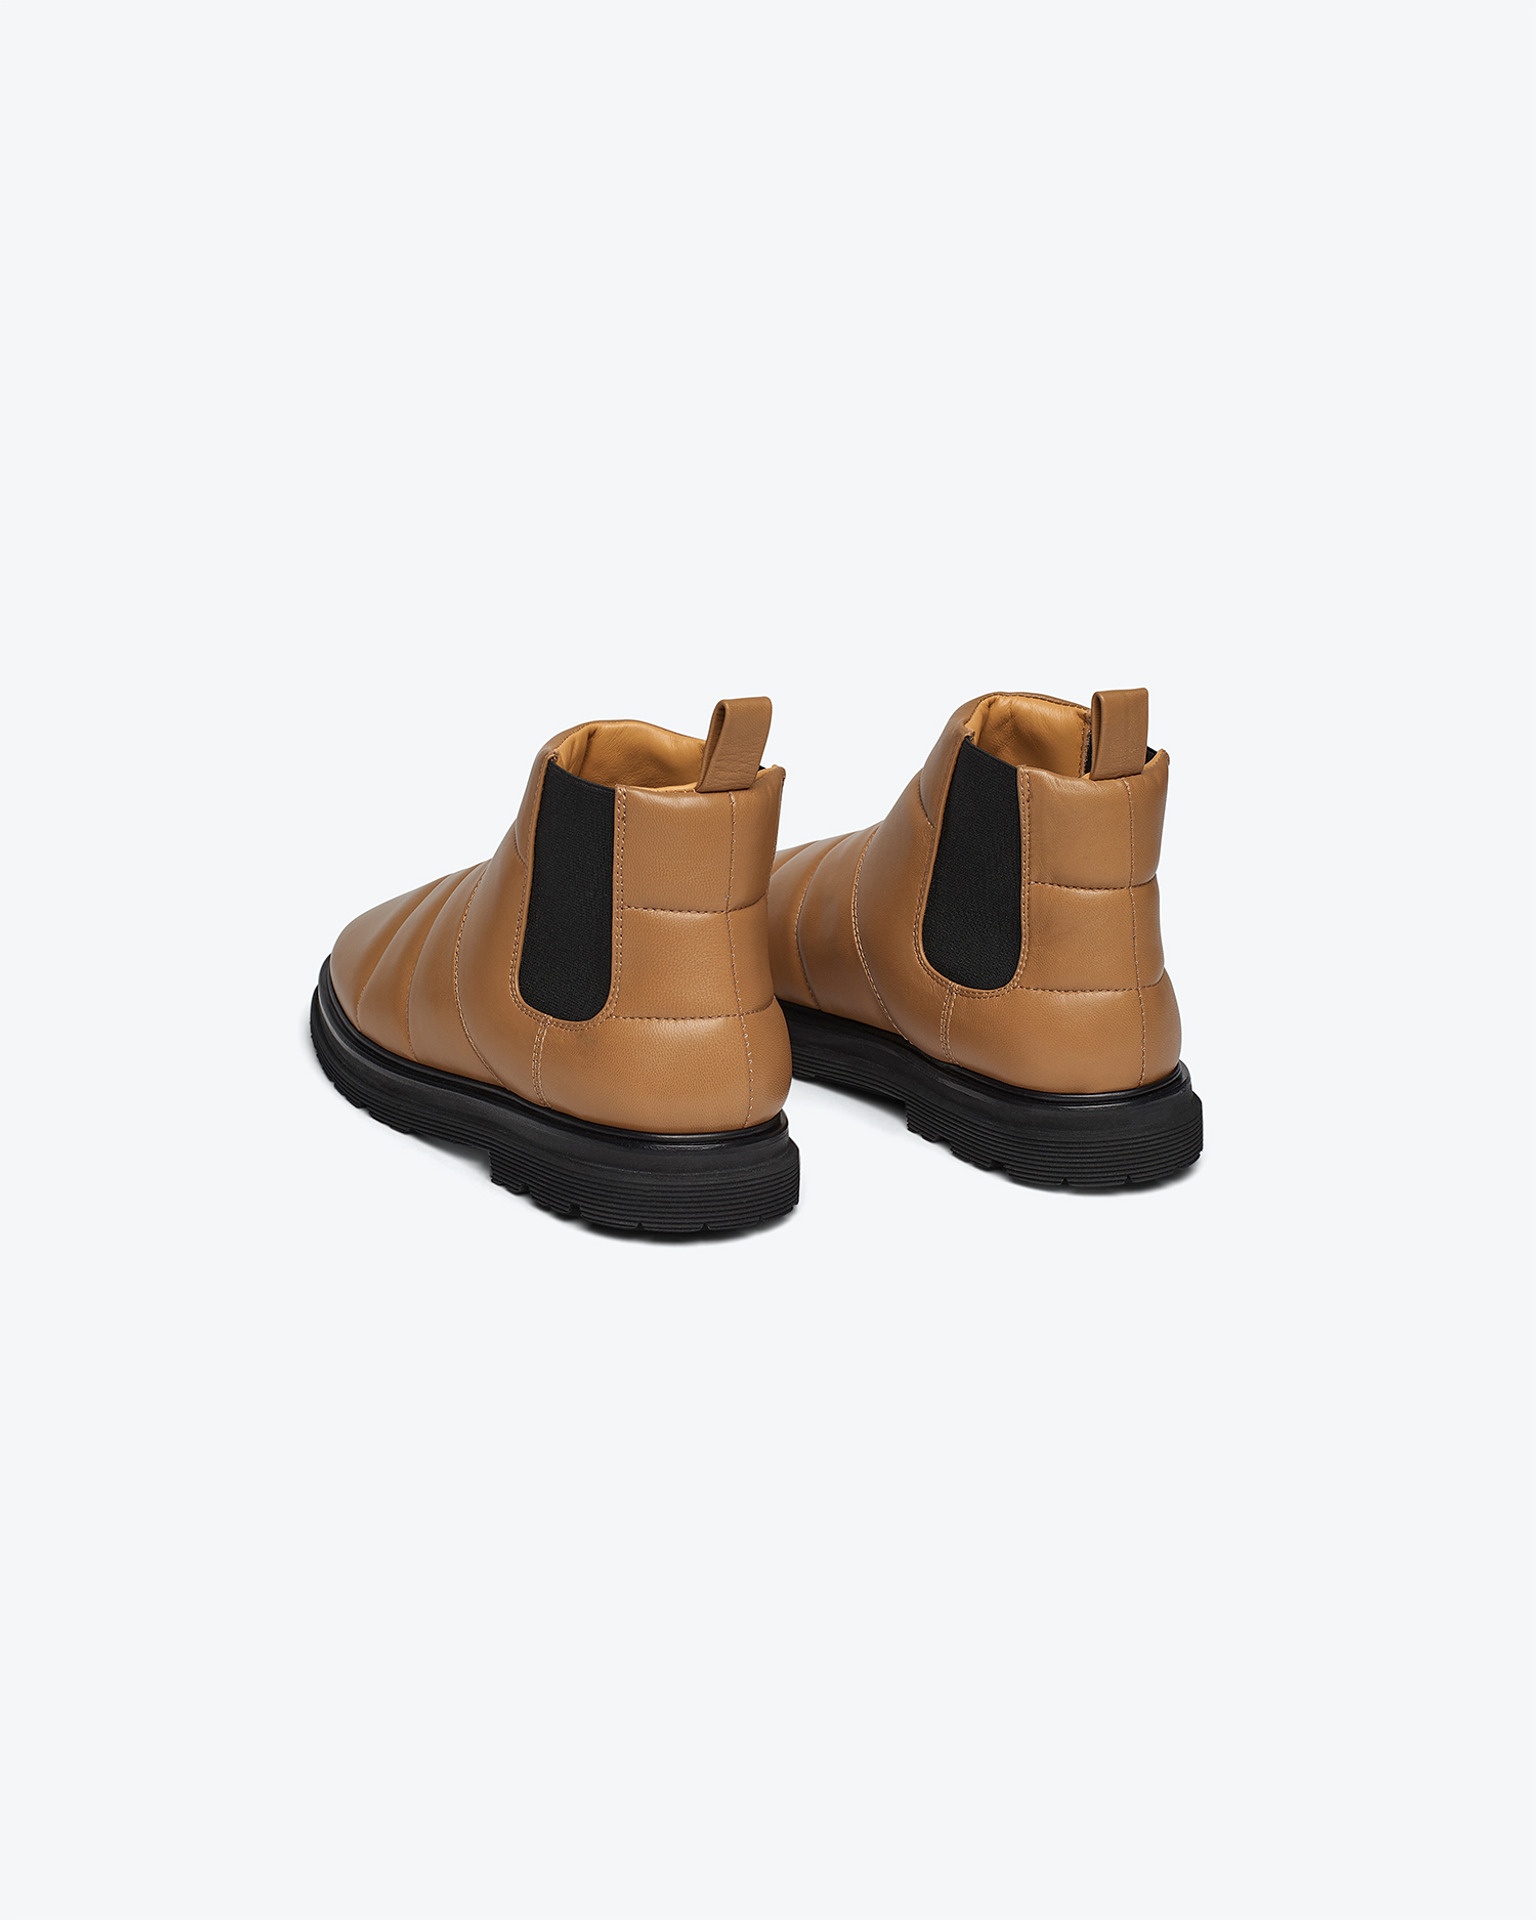 BEDE - Rounded toe boot - Nut brown - 3